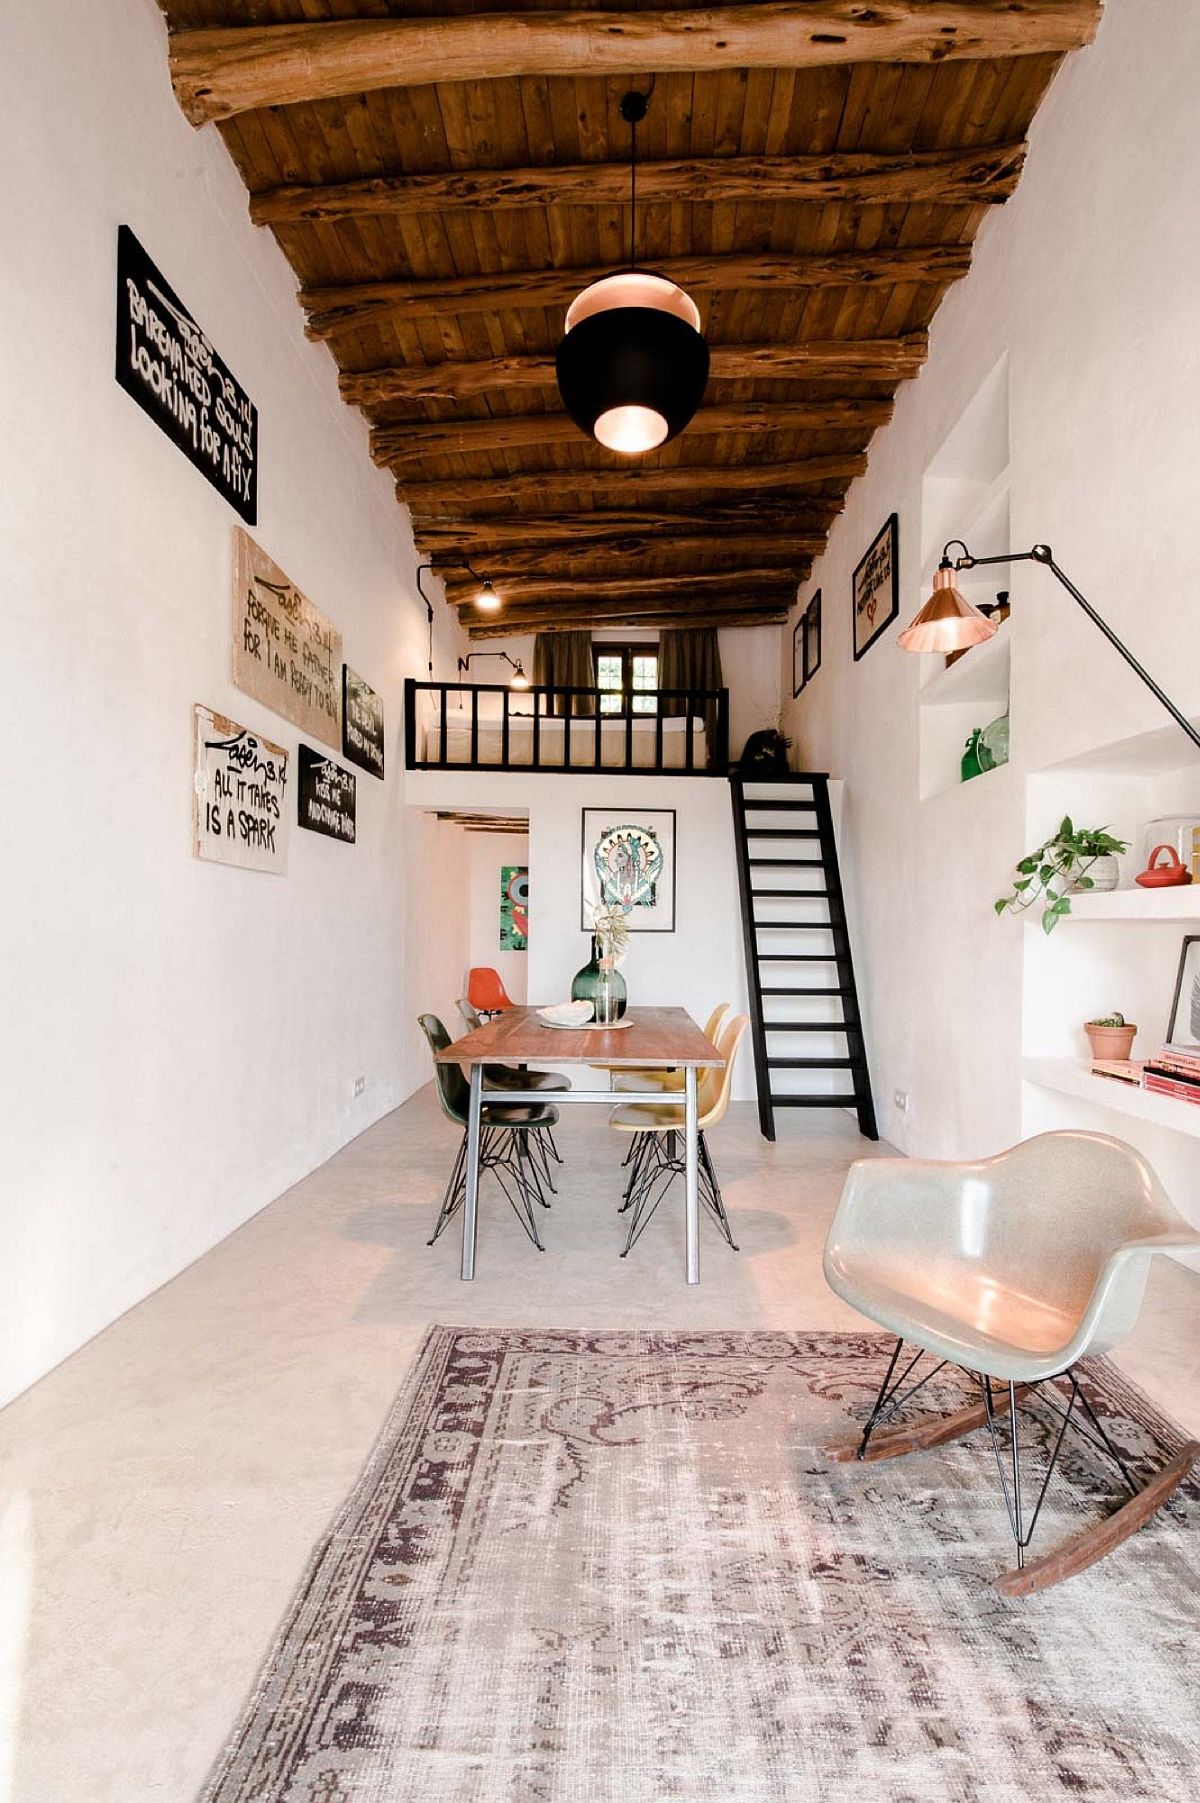 Living room of the Ibiza guesthouse combines the old and the new